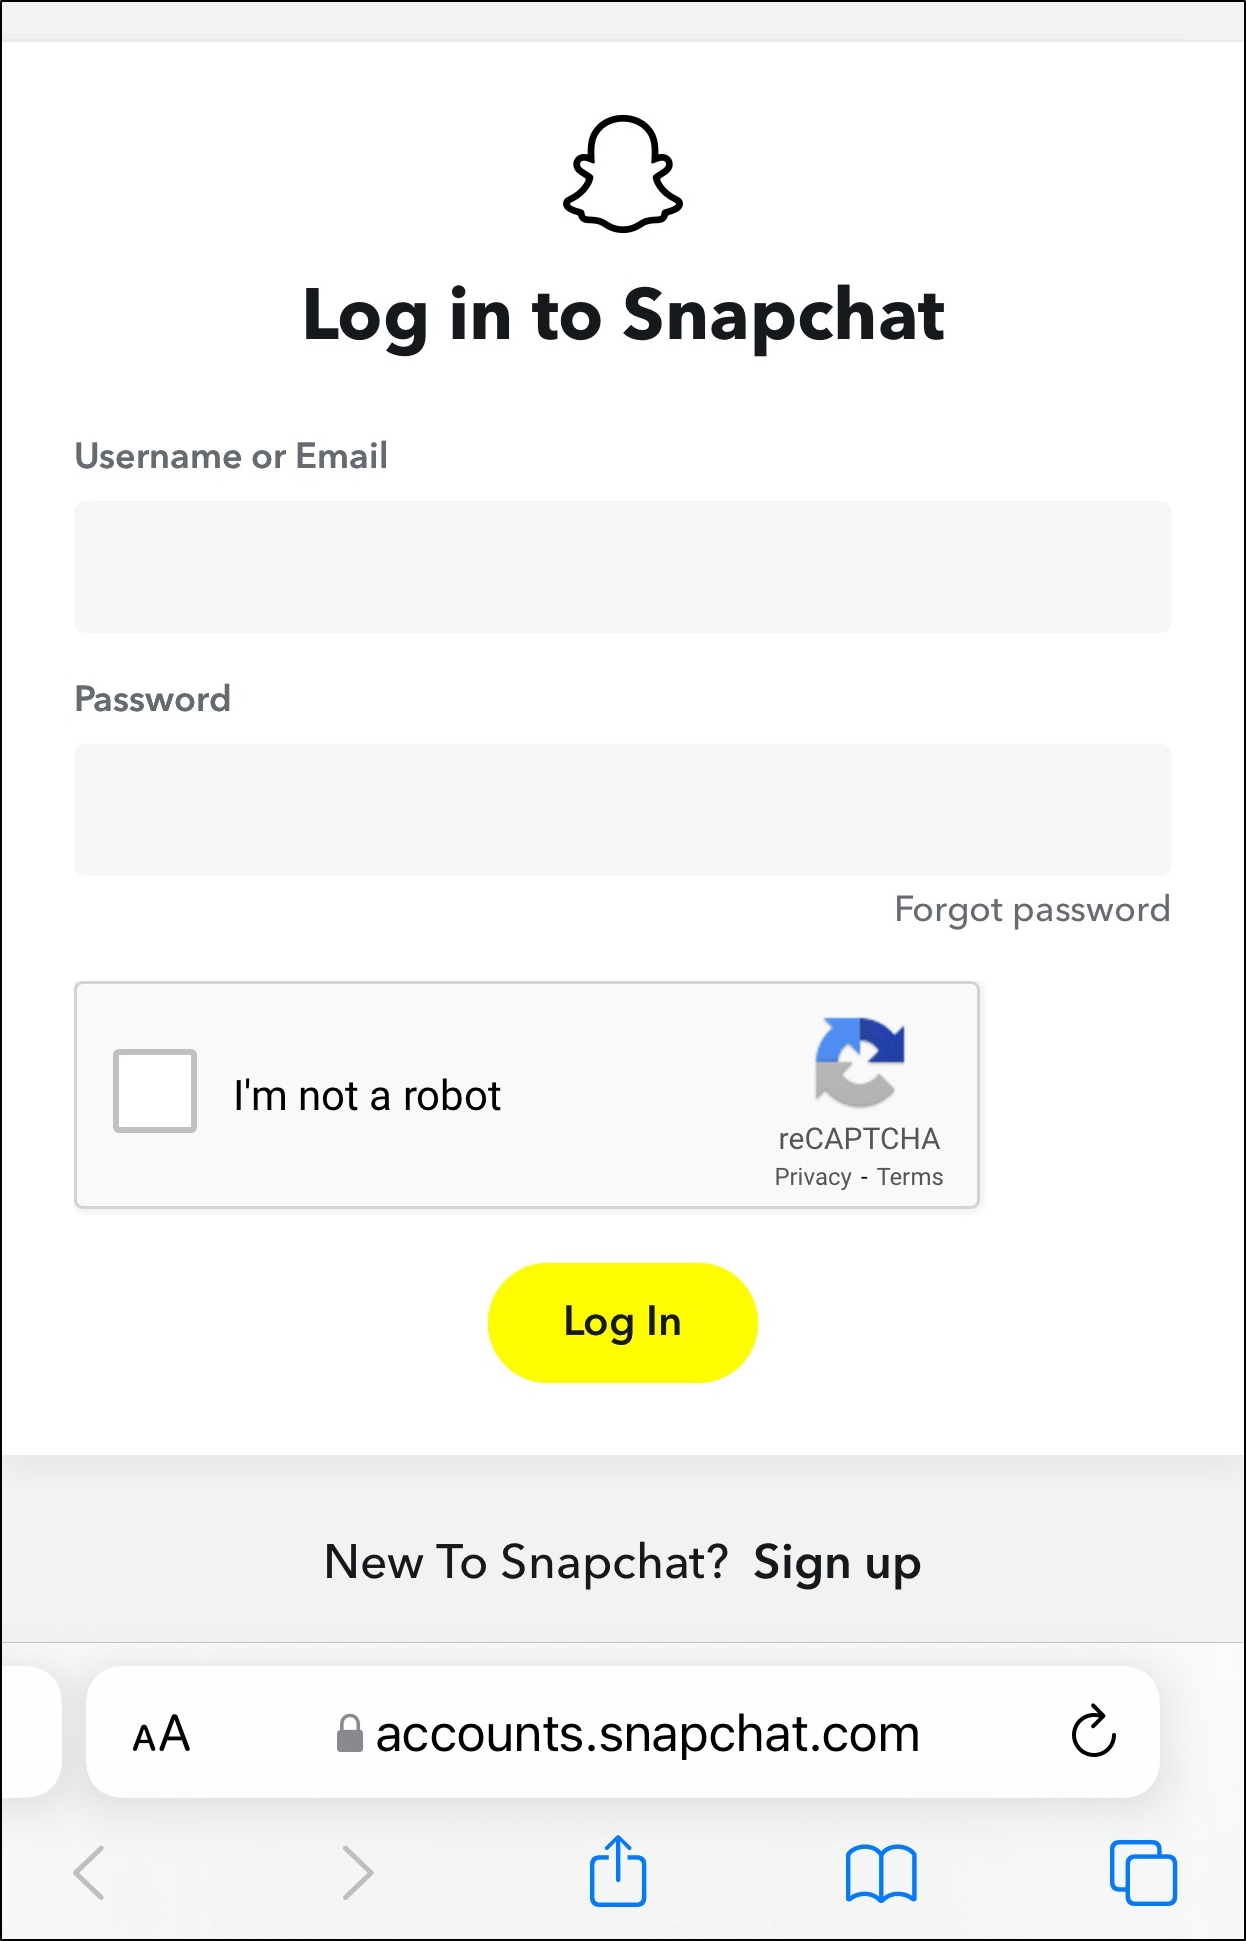 Log in to Snapchat from the website on mobile or PC browser if can't log in, sign in to Snapchat, password not working, or Could Not Connect error